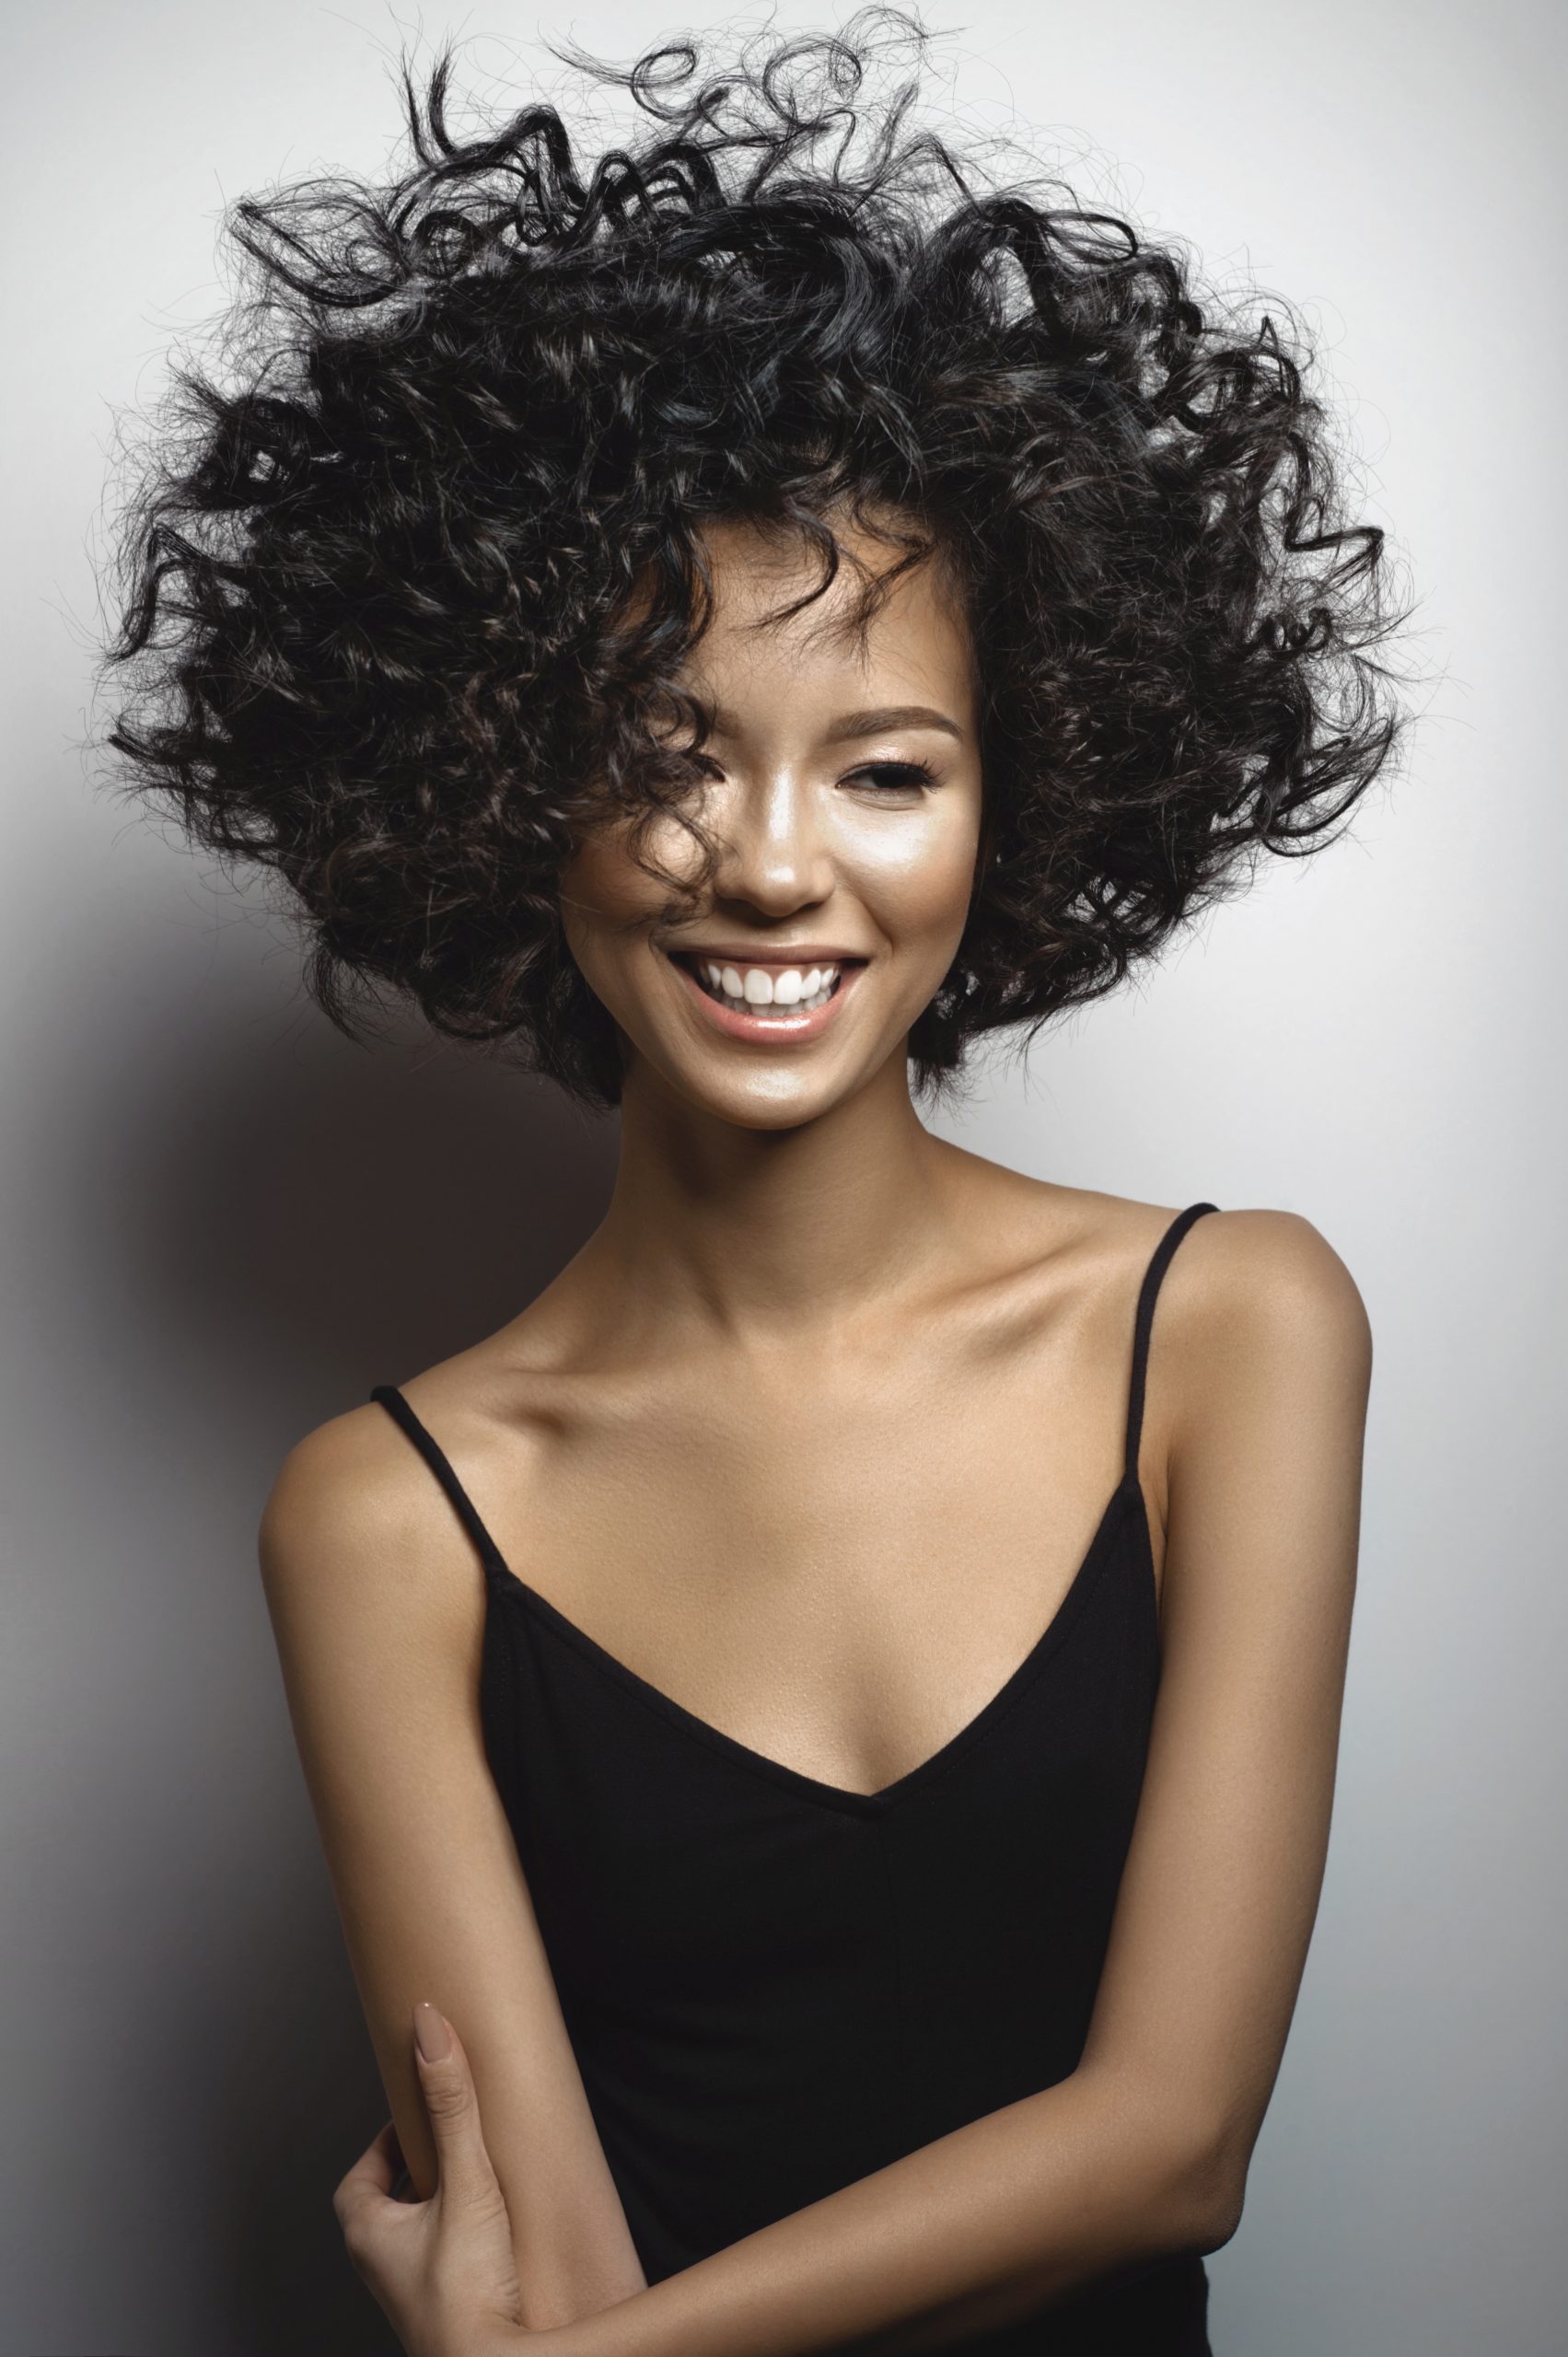 Fashion studio portrait of beautiful smiling woman in black dress with afro curls hairstyle. Fashion and beauty